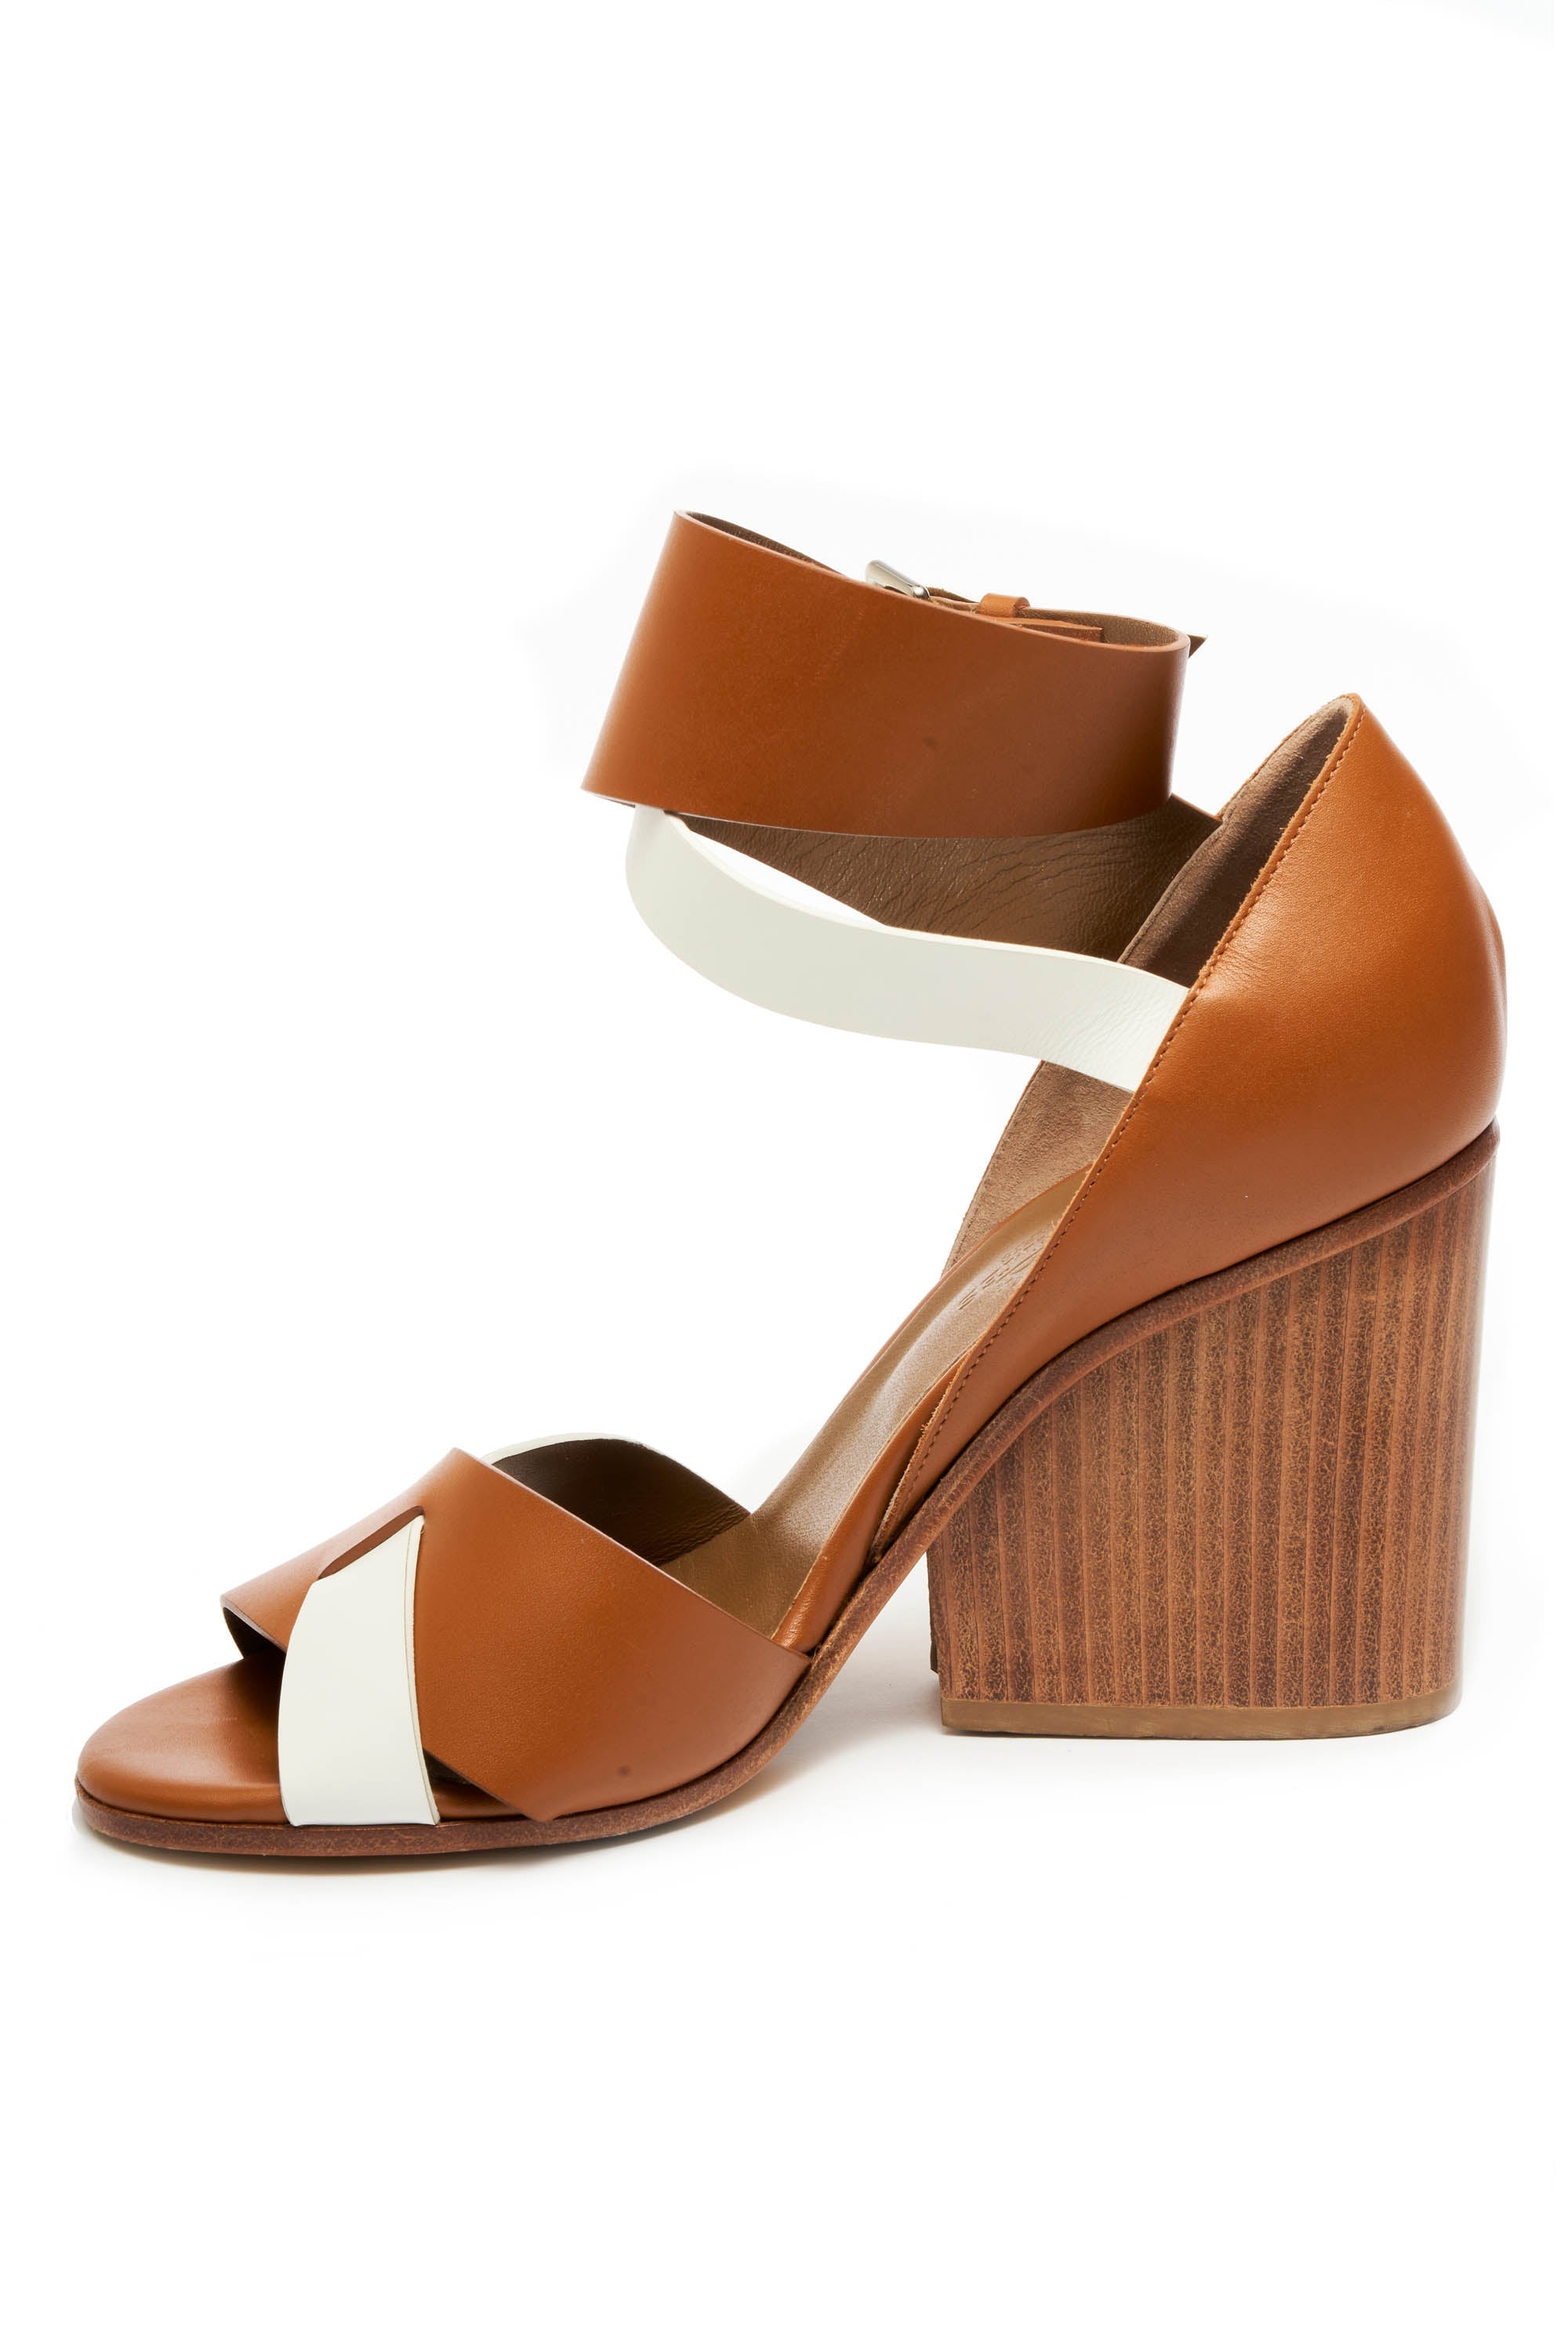 Hermes Cream and Tan Wooden Wedge Sandals Size 37